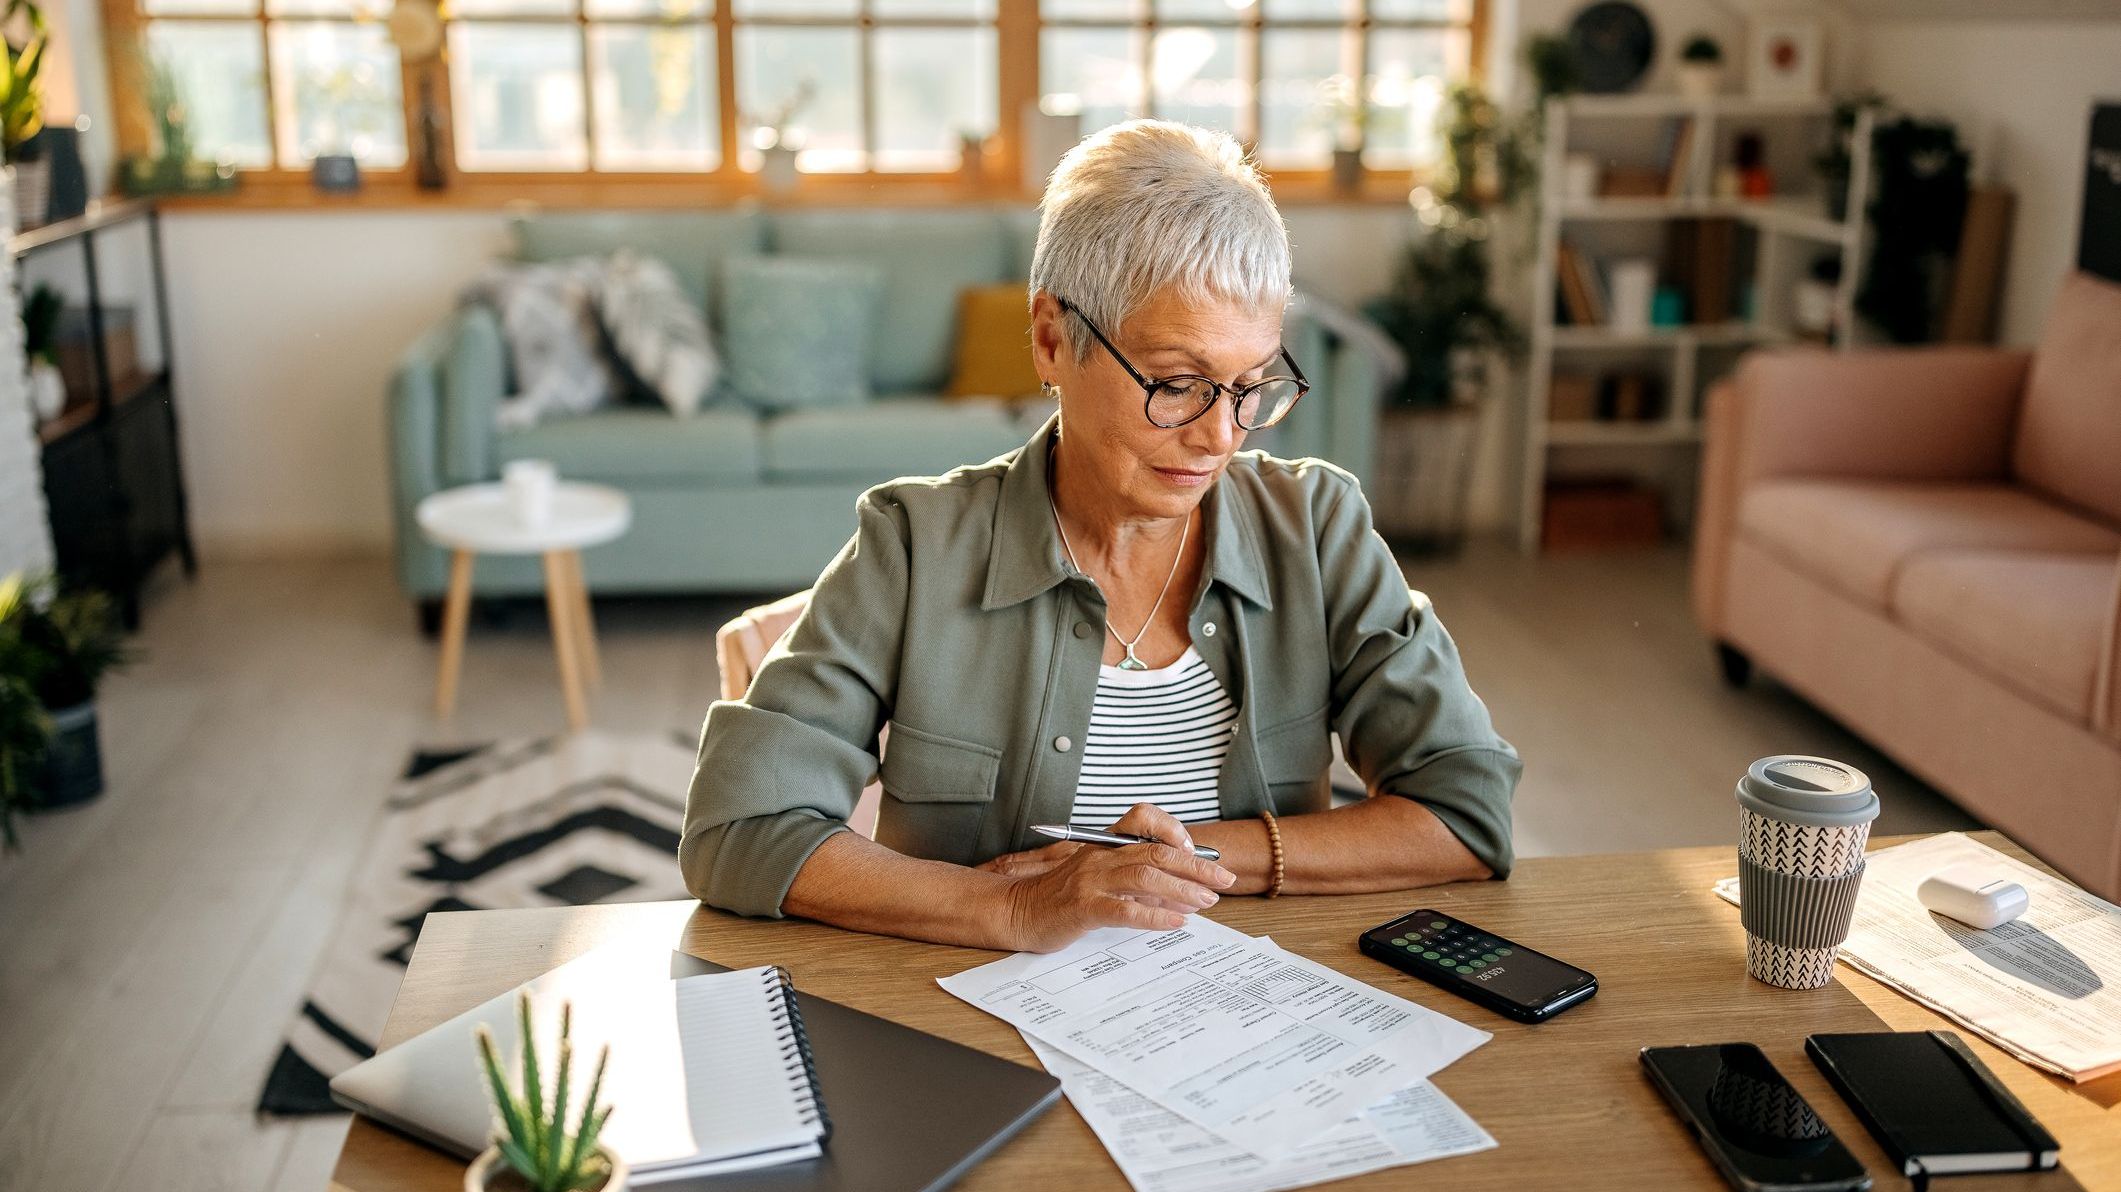 A woman reviews her projected expenses in retirement to determine whether she can afford to retire at age 65.